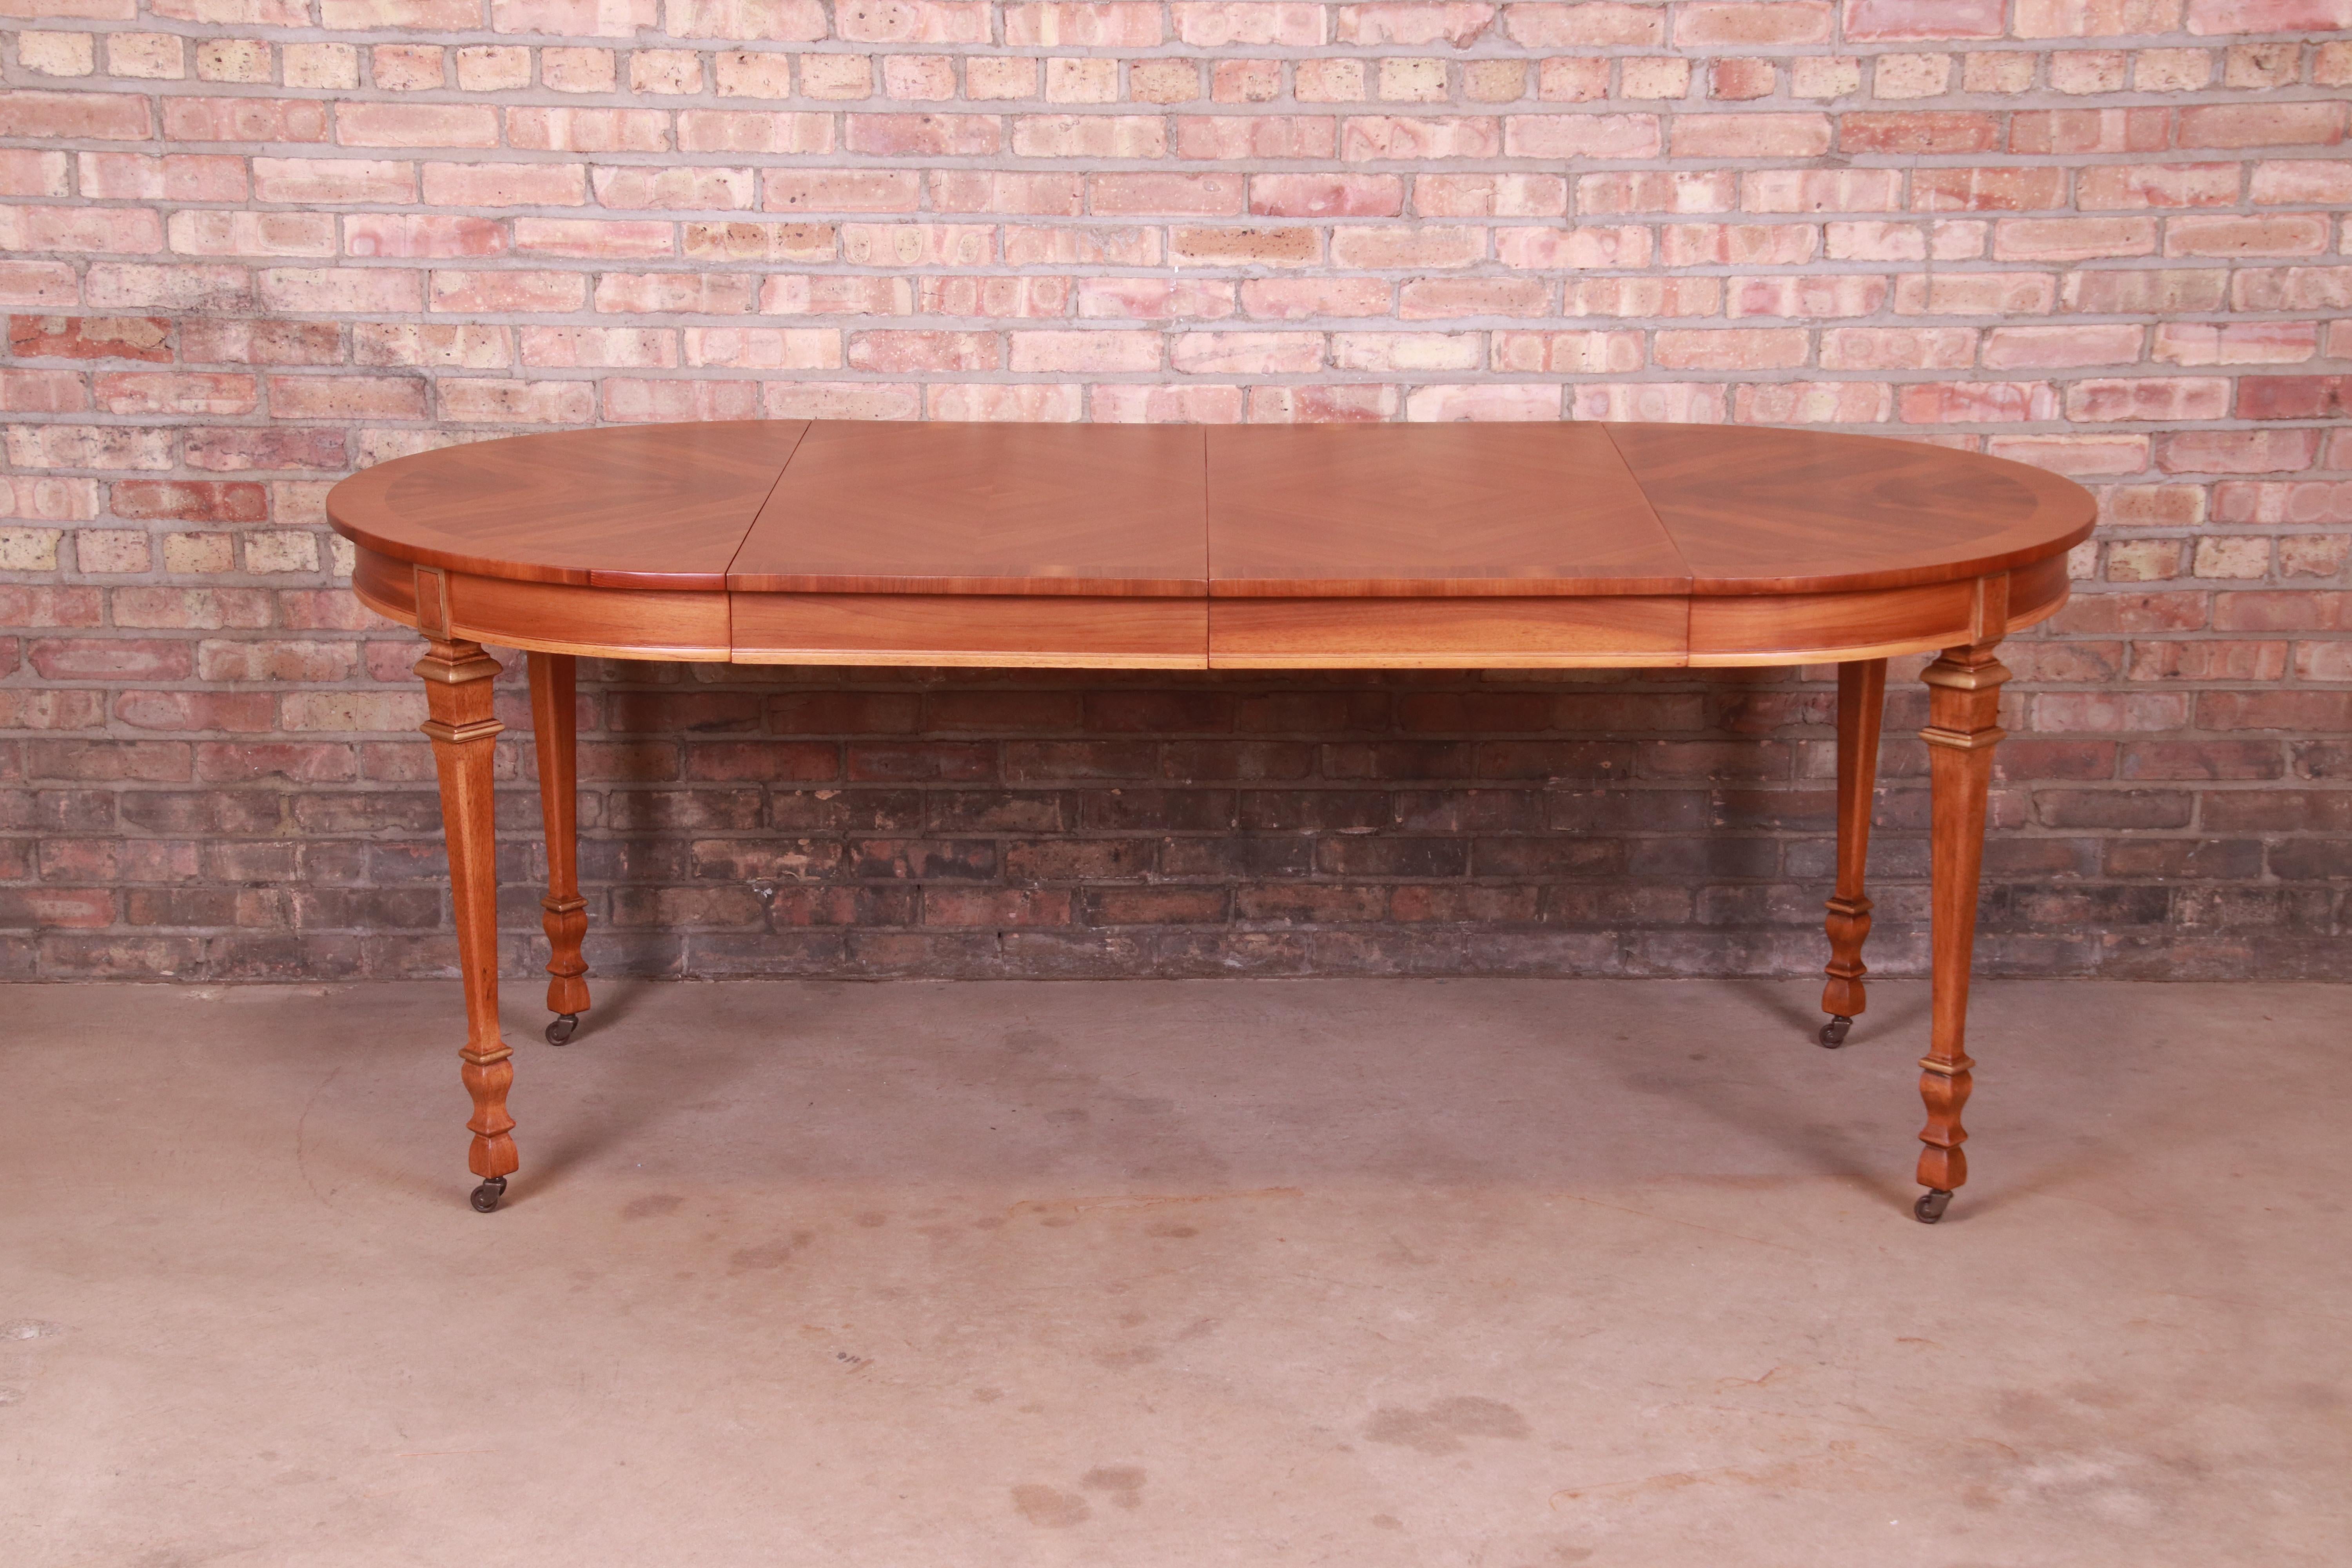 A gorgeous mid-century French Regency Louis XVI style extension dining table

By Drexel

USA, Mid-20th century

Book-matched walnut top, with carved walnut legs and gold gilt details.

Measures: 40